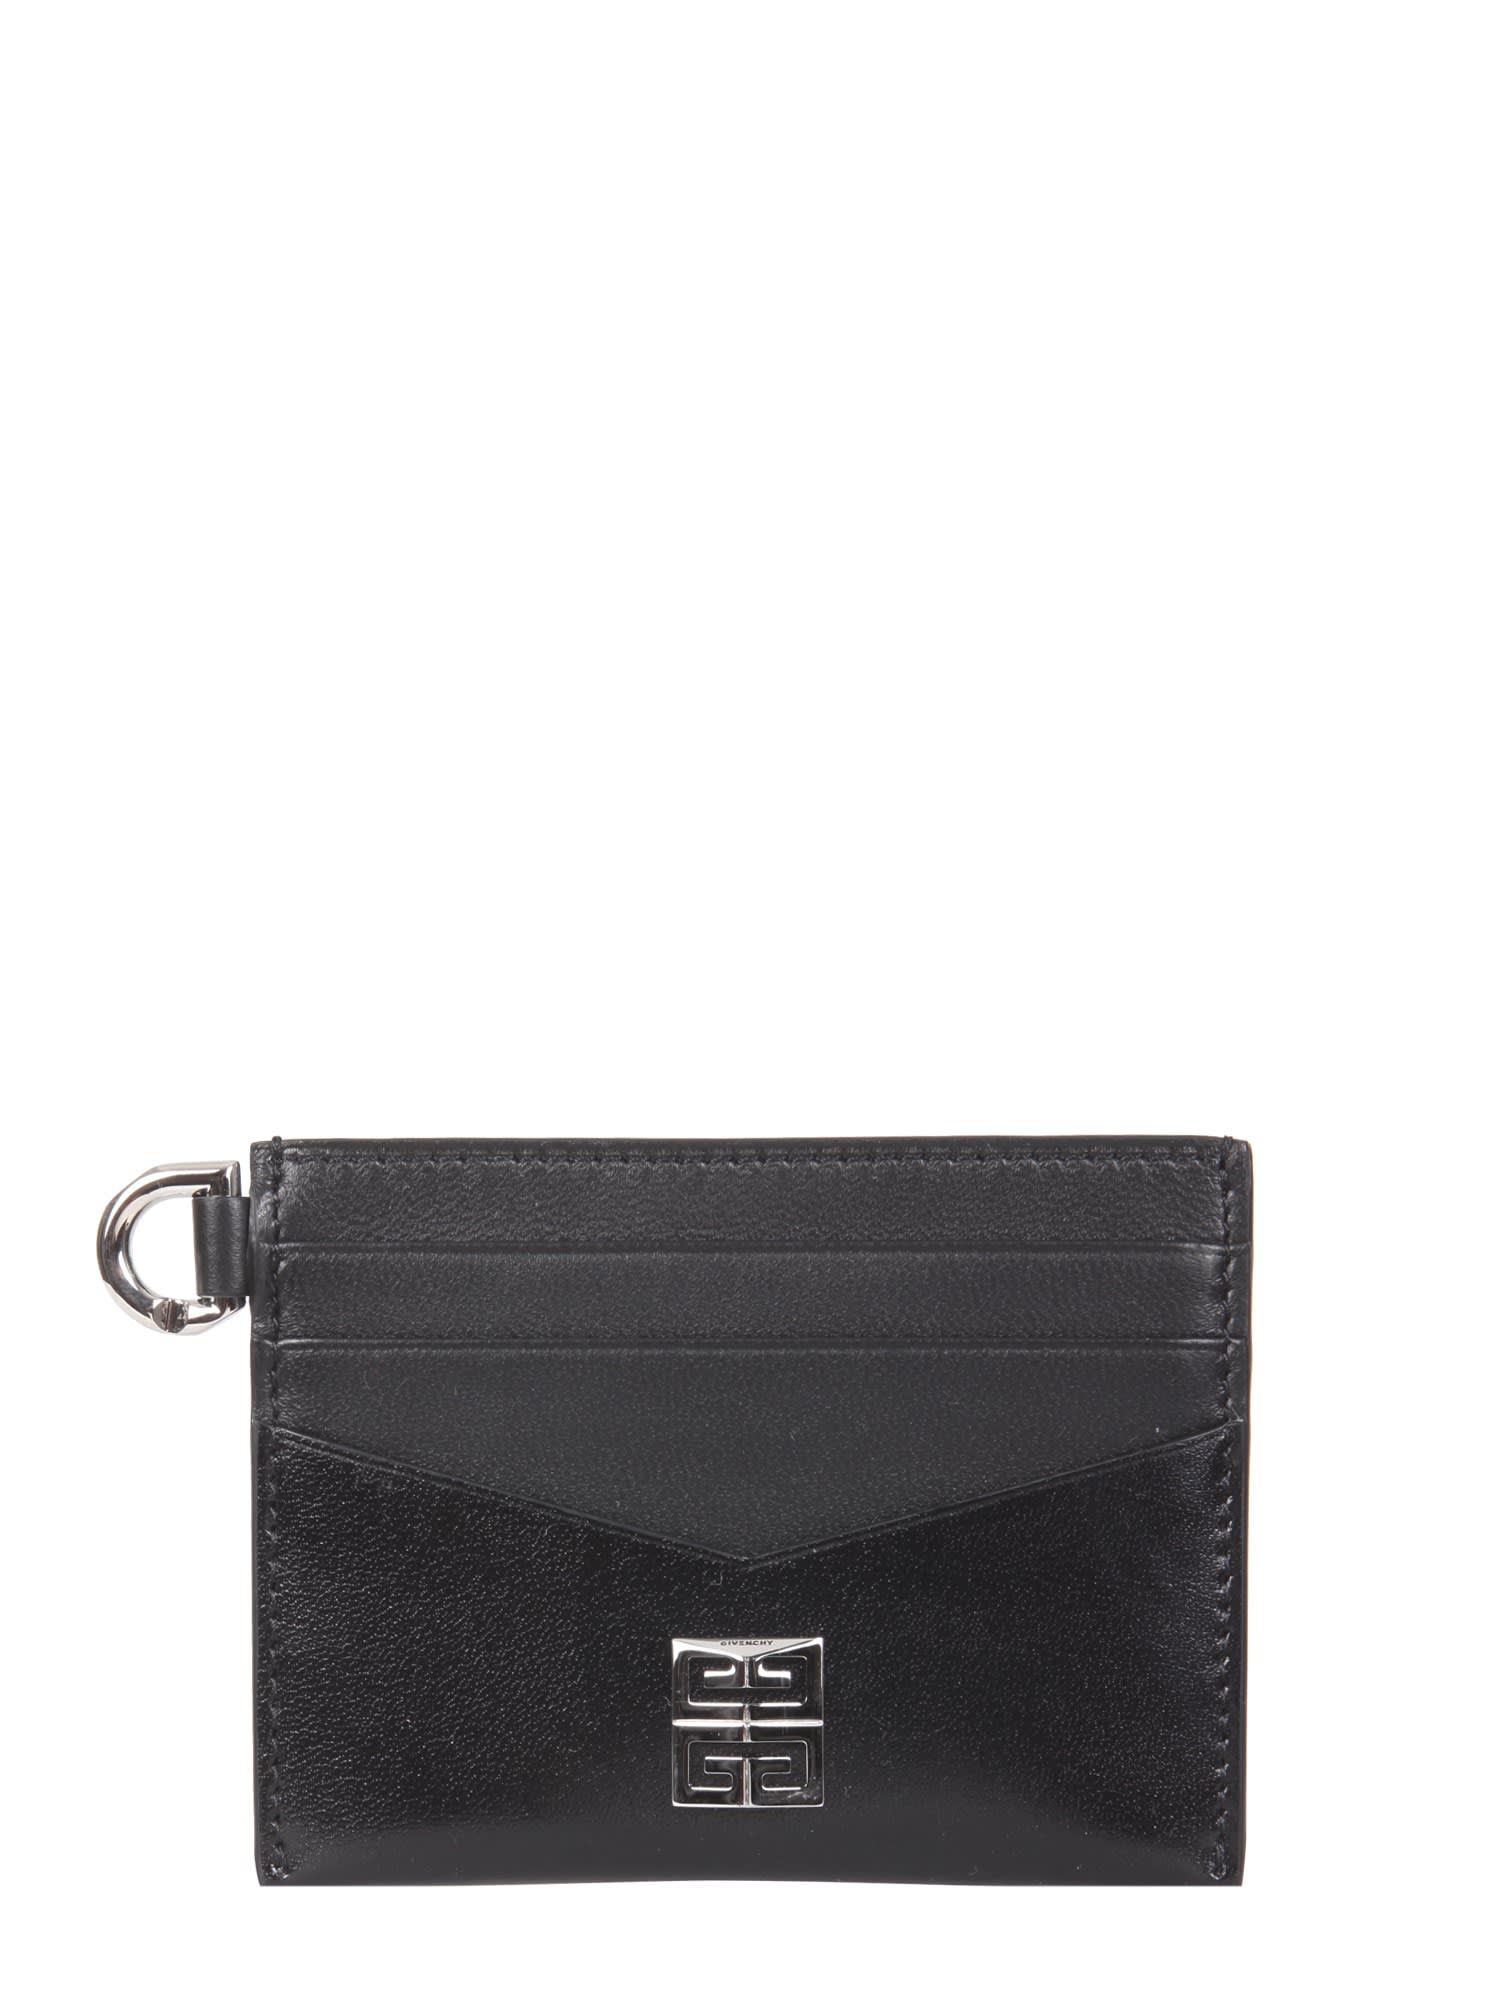 Givenchy 4g Leather Box Card Holder